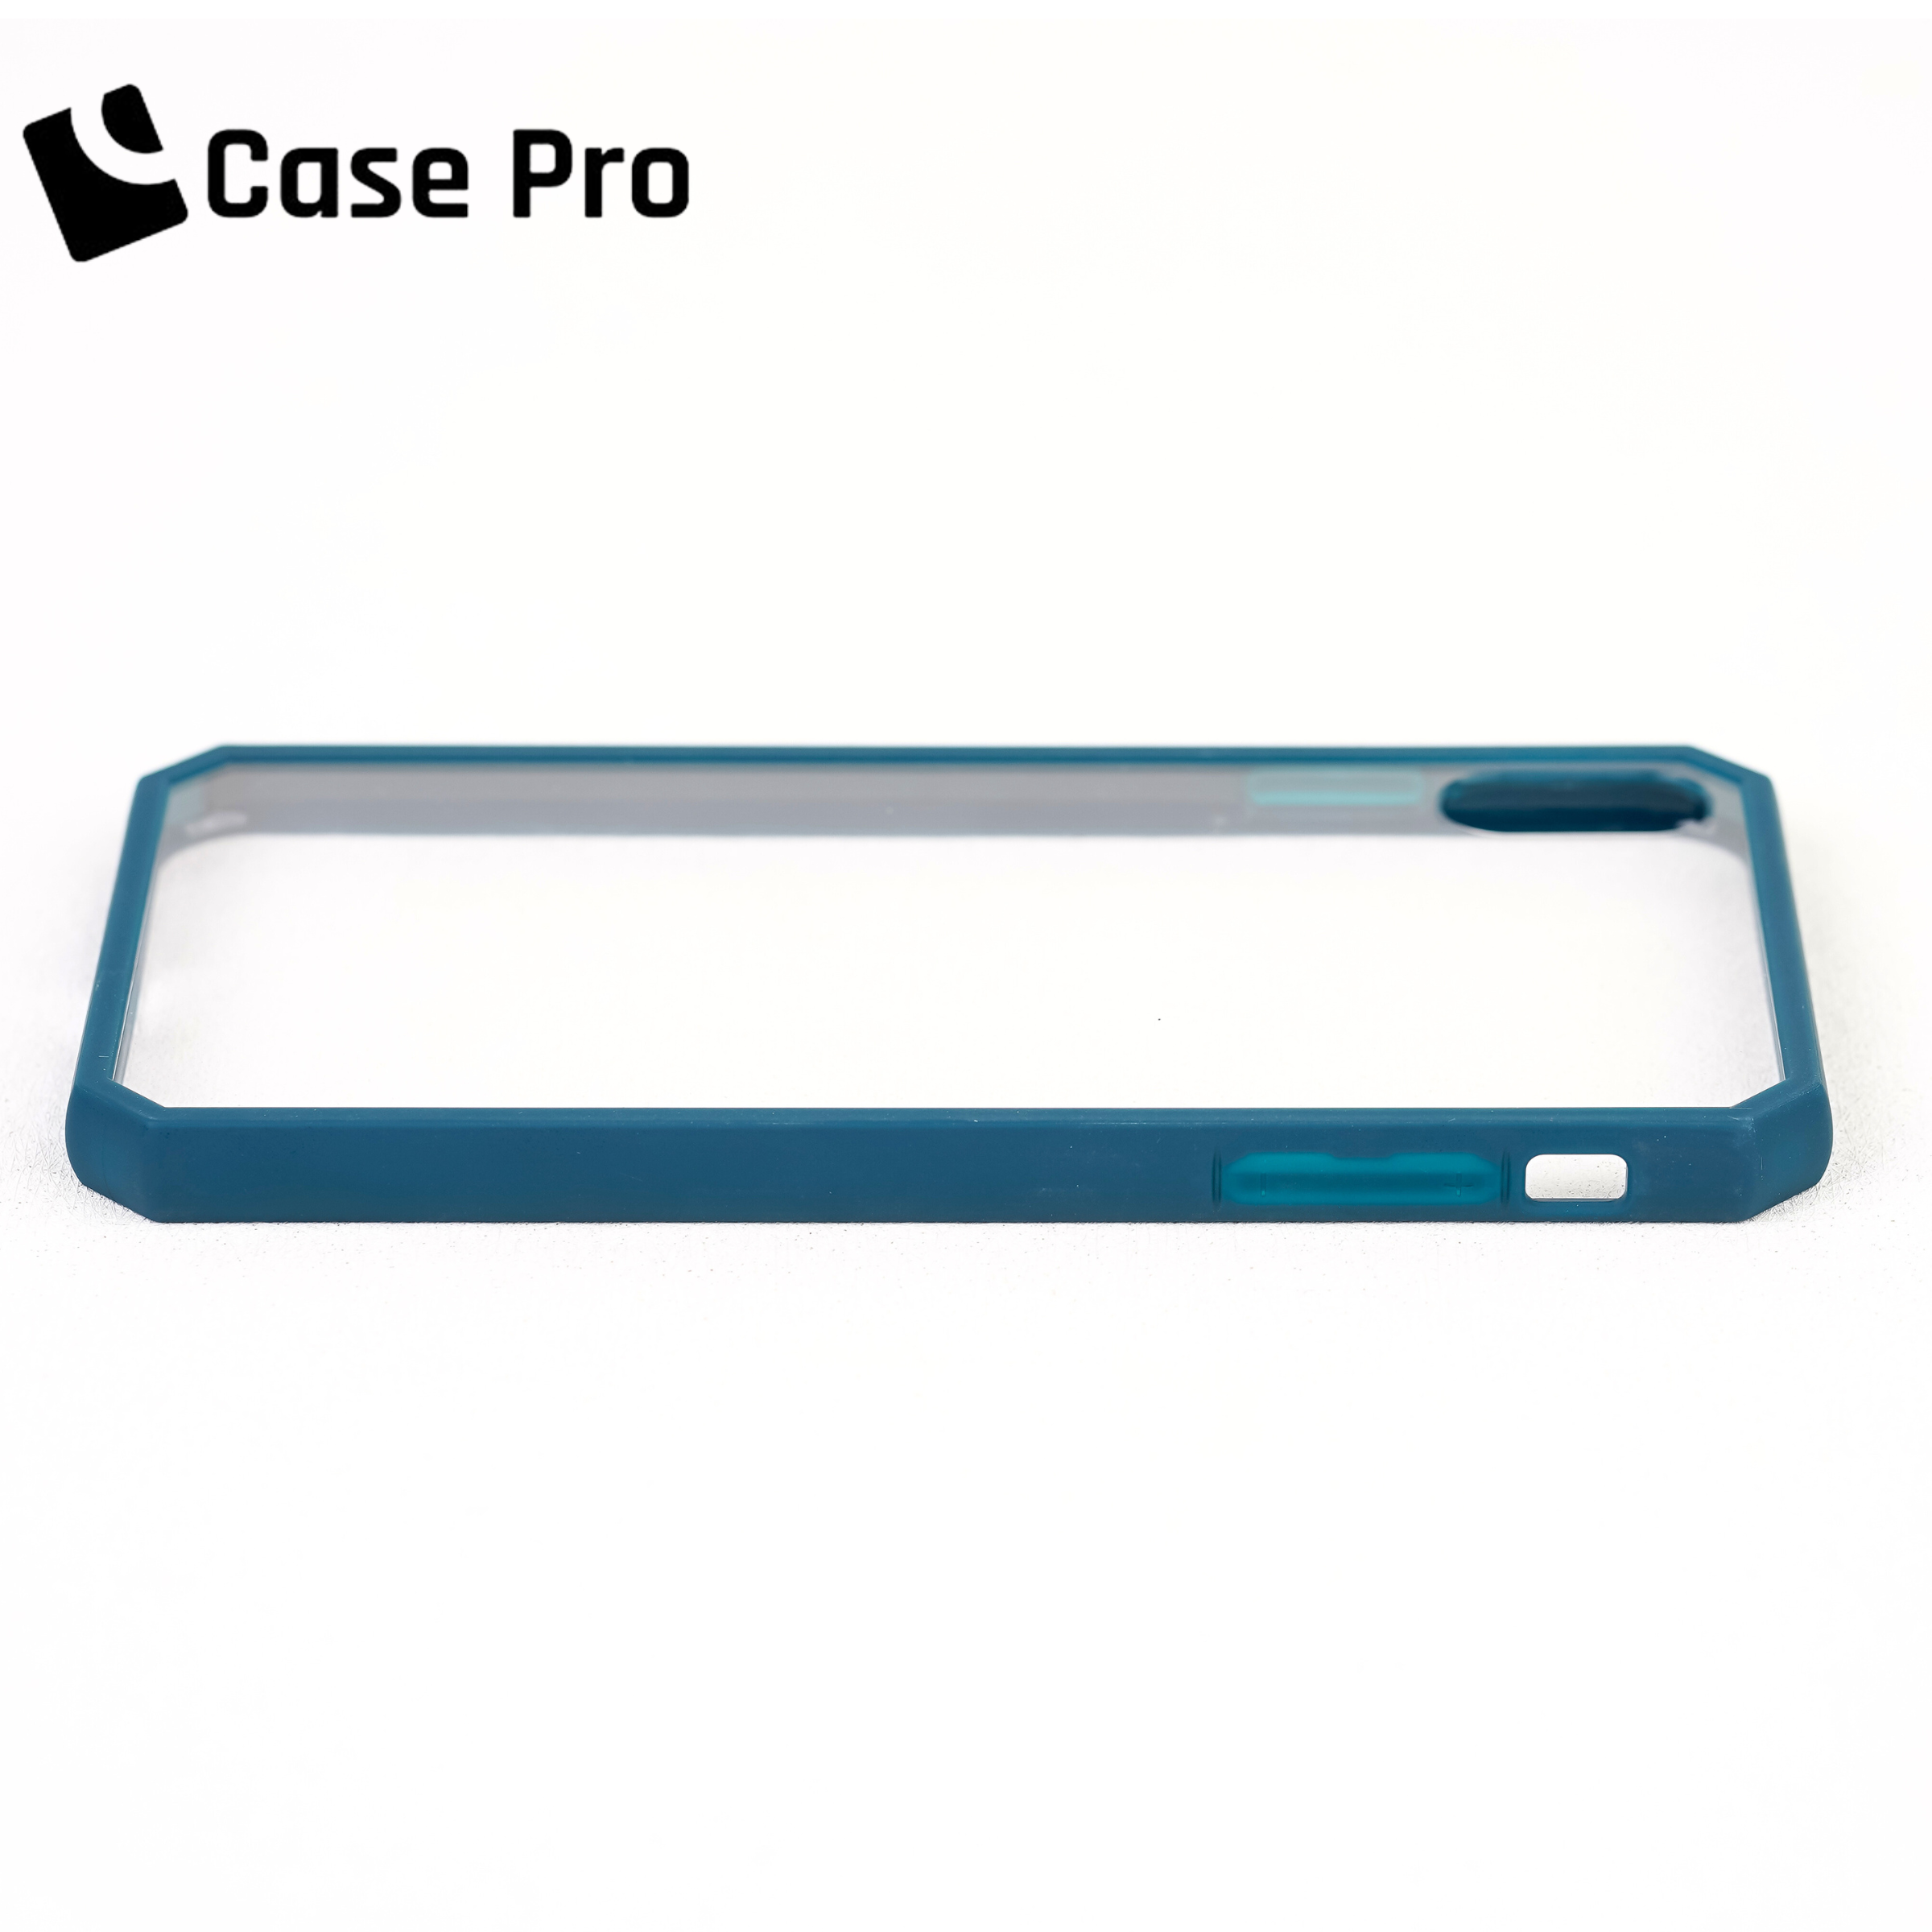 CASE PRO IMPACT PROTECTION CASE FOR IPH XS MAX (6.5")